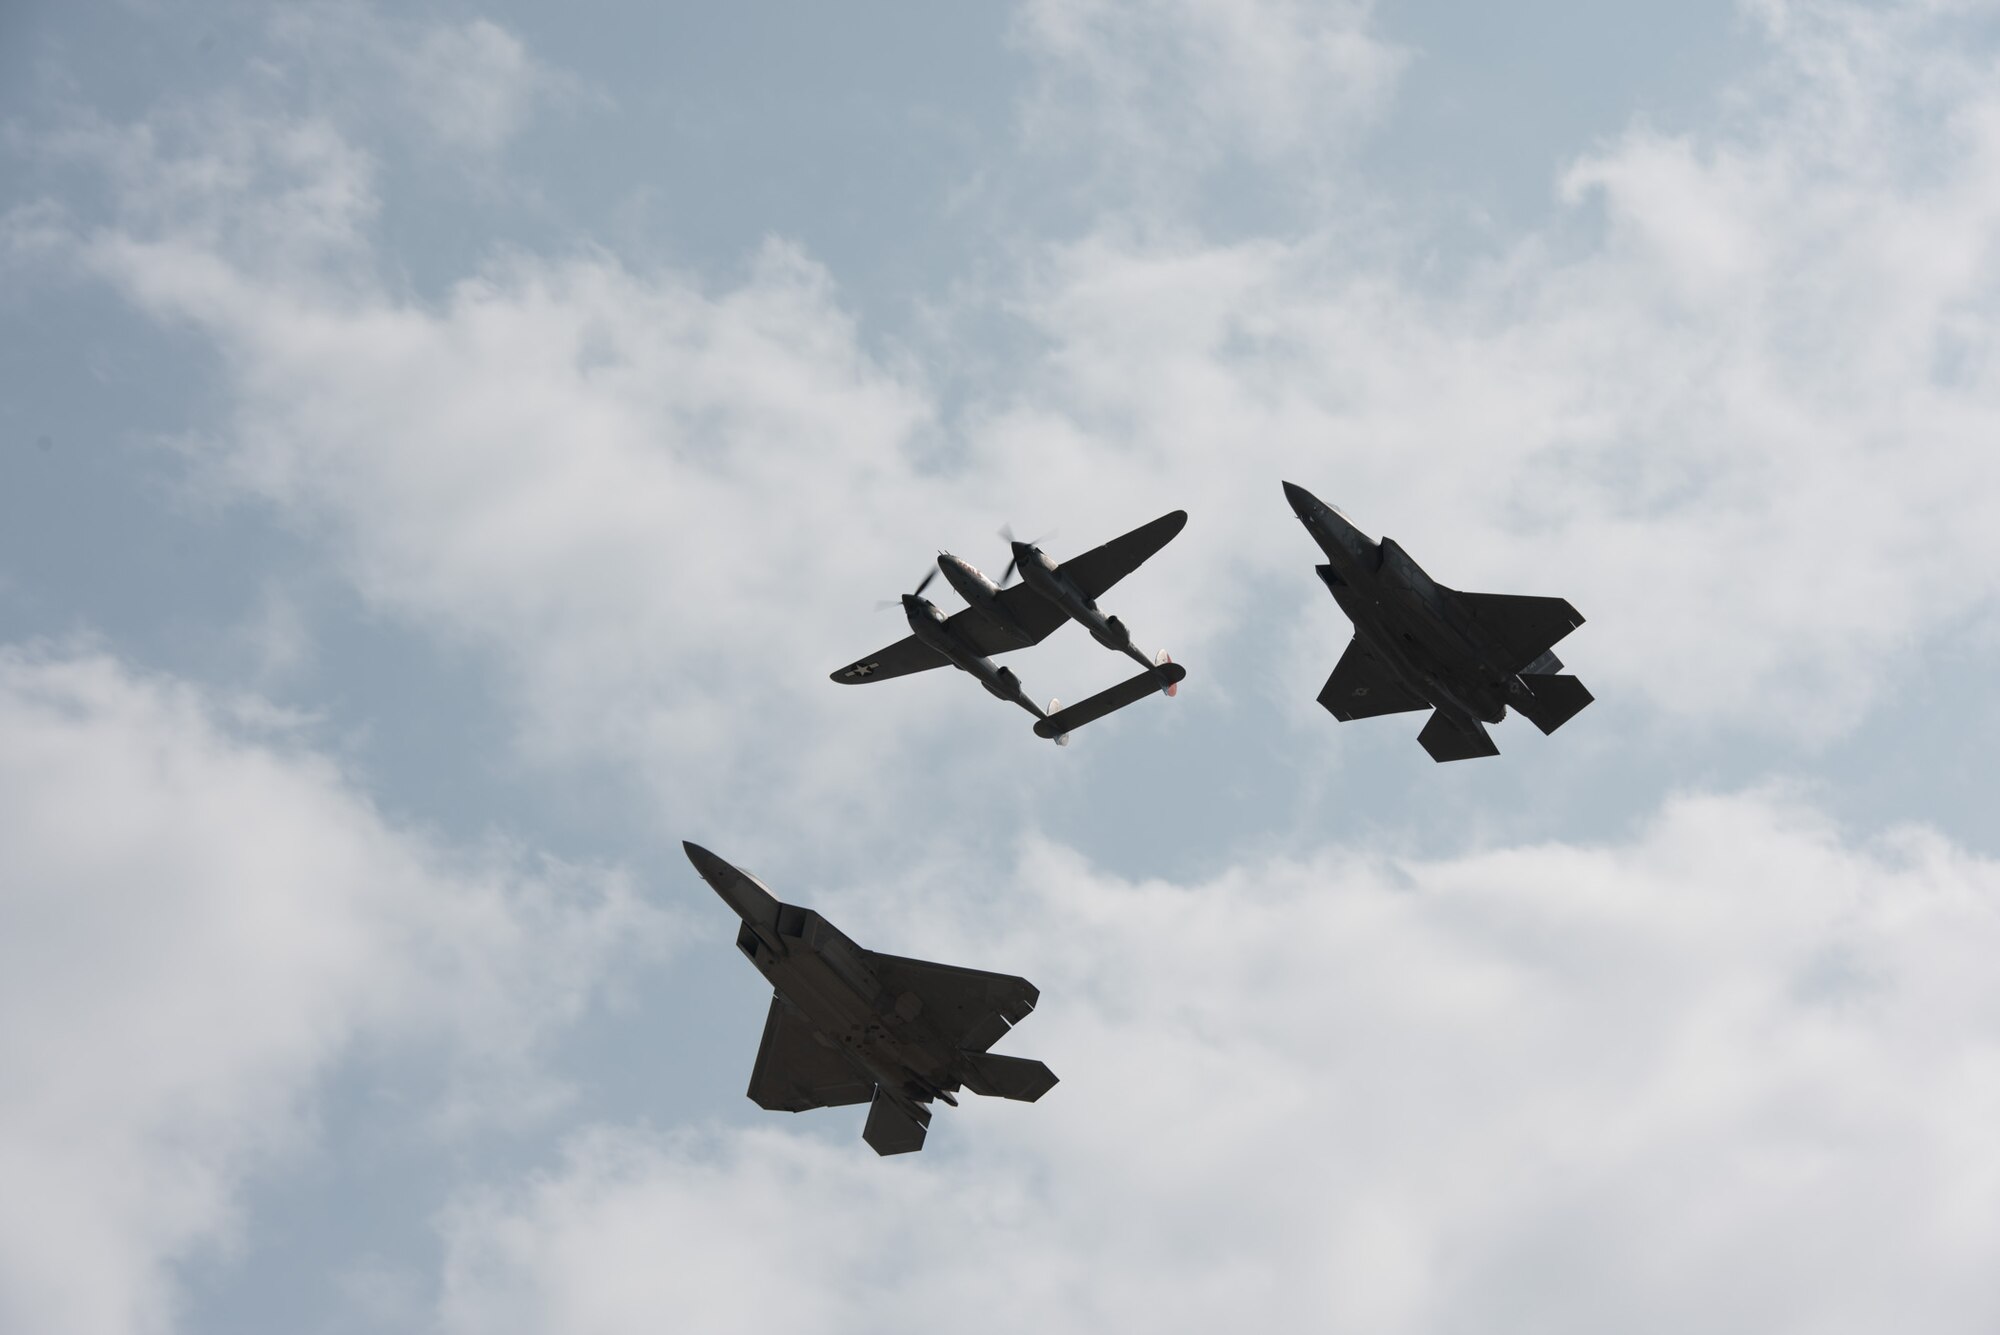 An F-22 Raptor, a P-38 Lightning and an F-35 Lightning II perform a heritage flight during the 2018 Defenders of Freedom Air & Space Show Aug. 12, at Offutt Air Force Base, Nebraska.